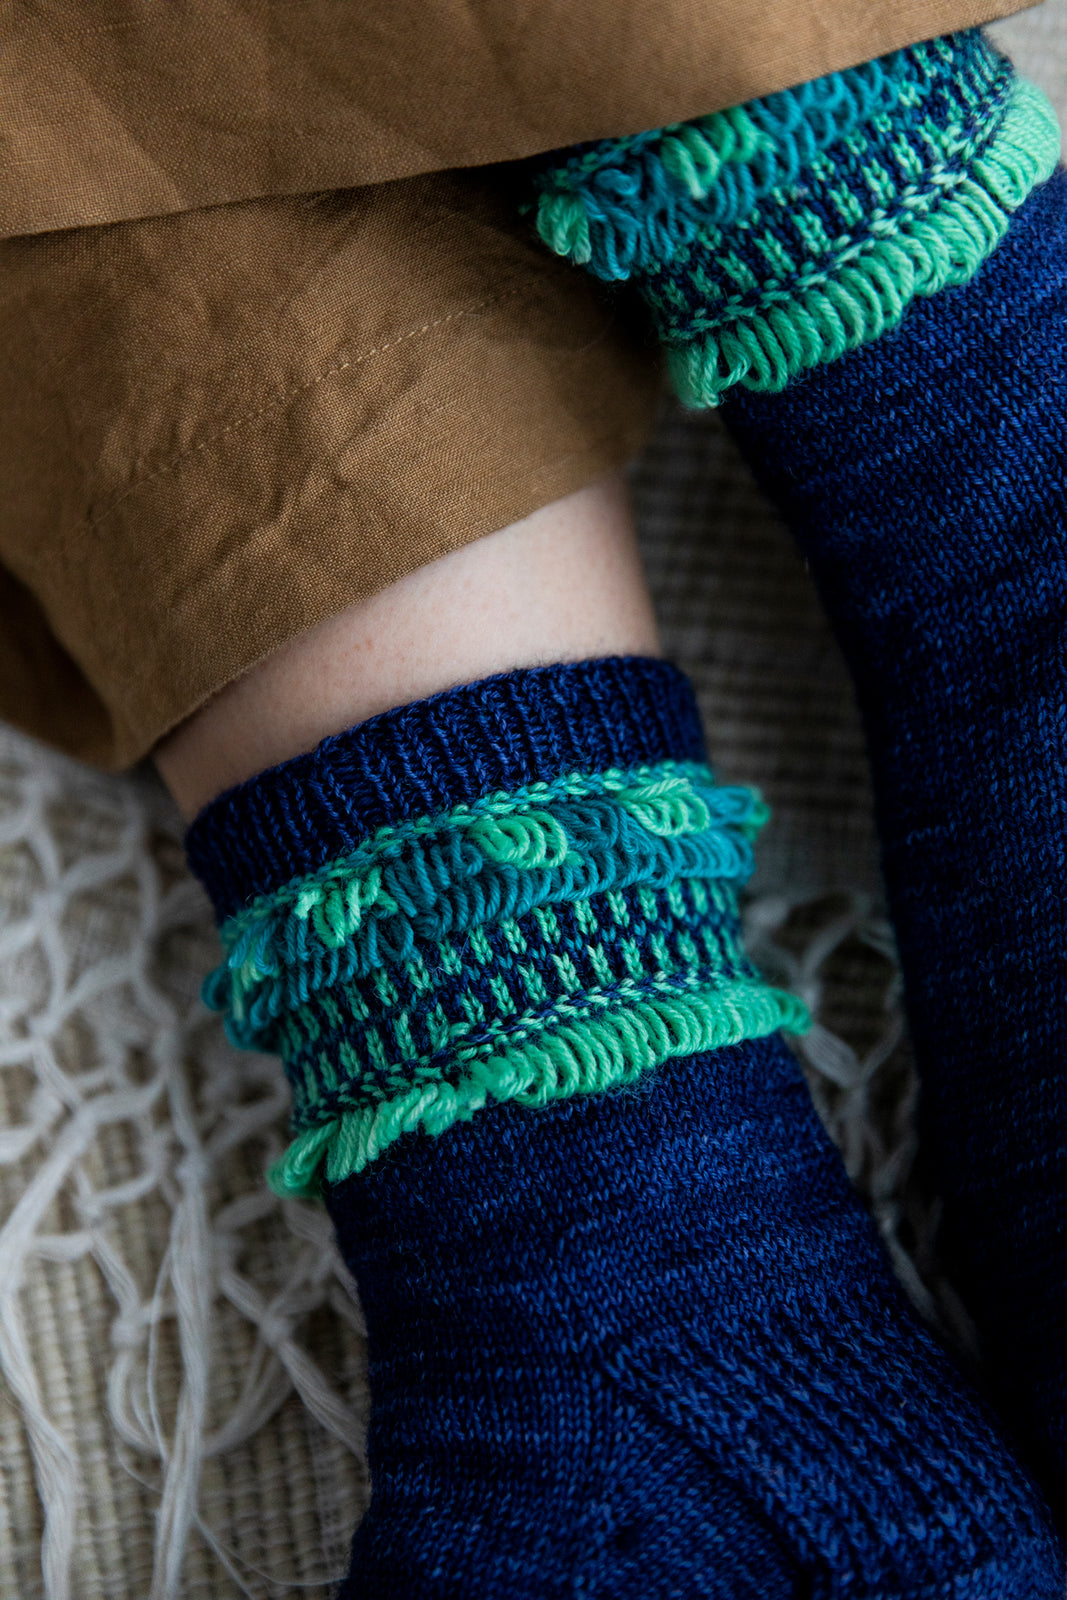 CH 283: 52 Weeks of Socks Review - Curious Handmade Knitting